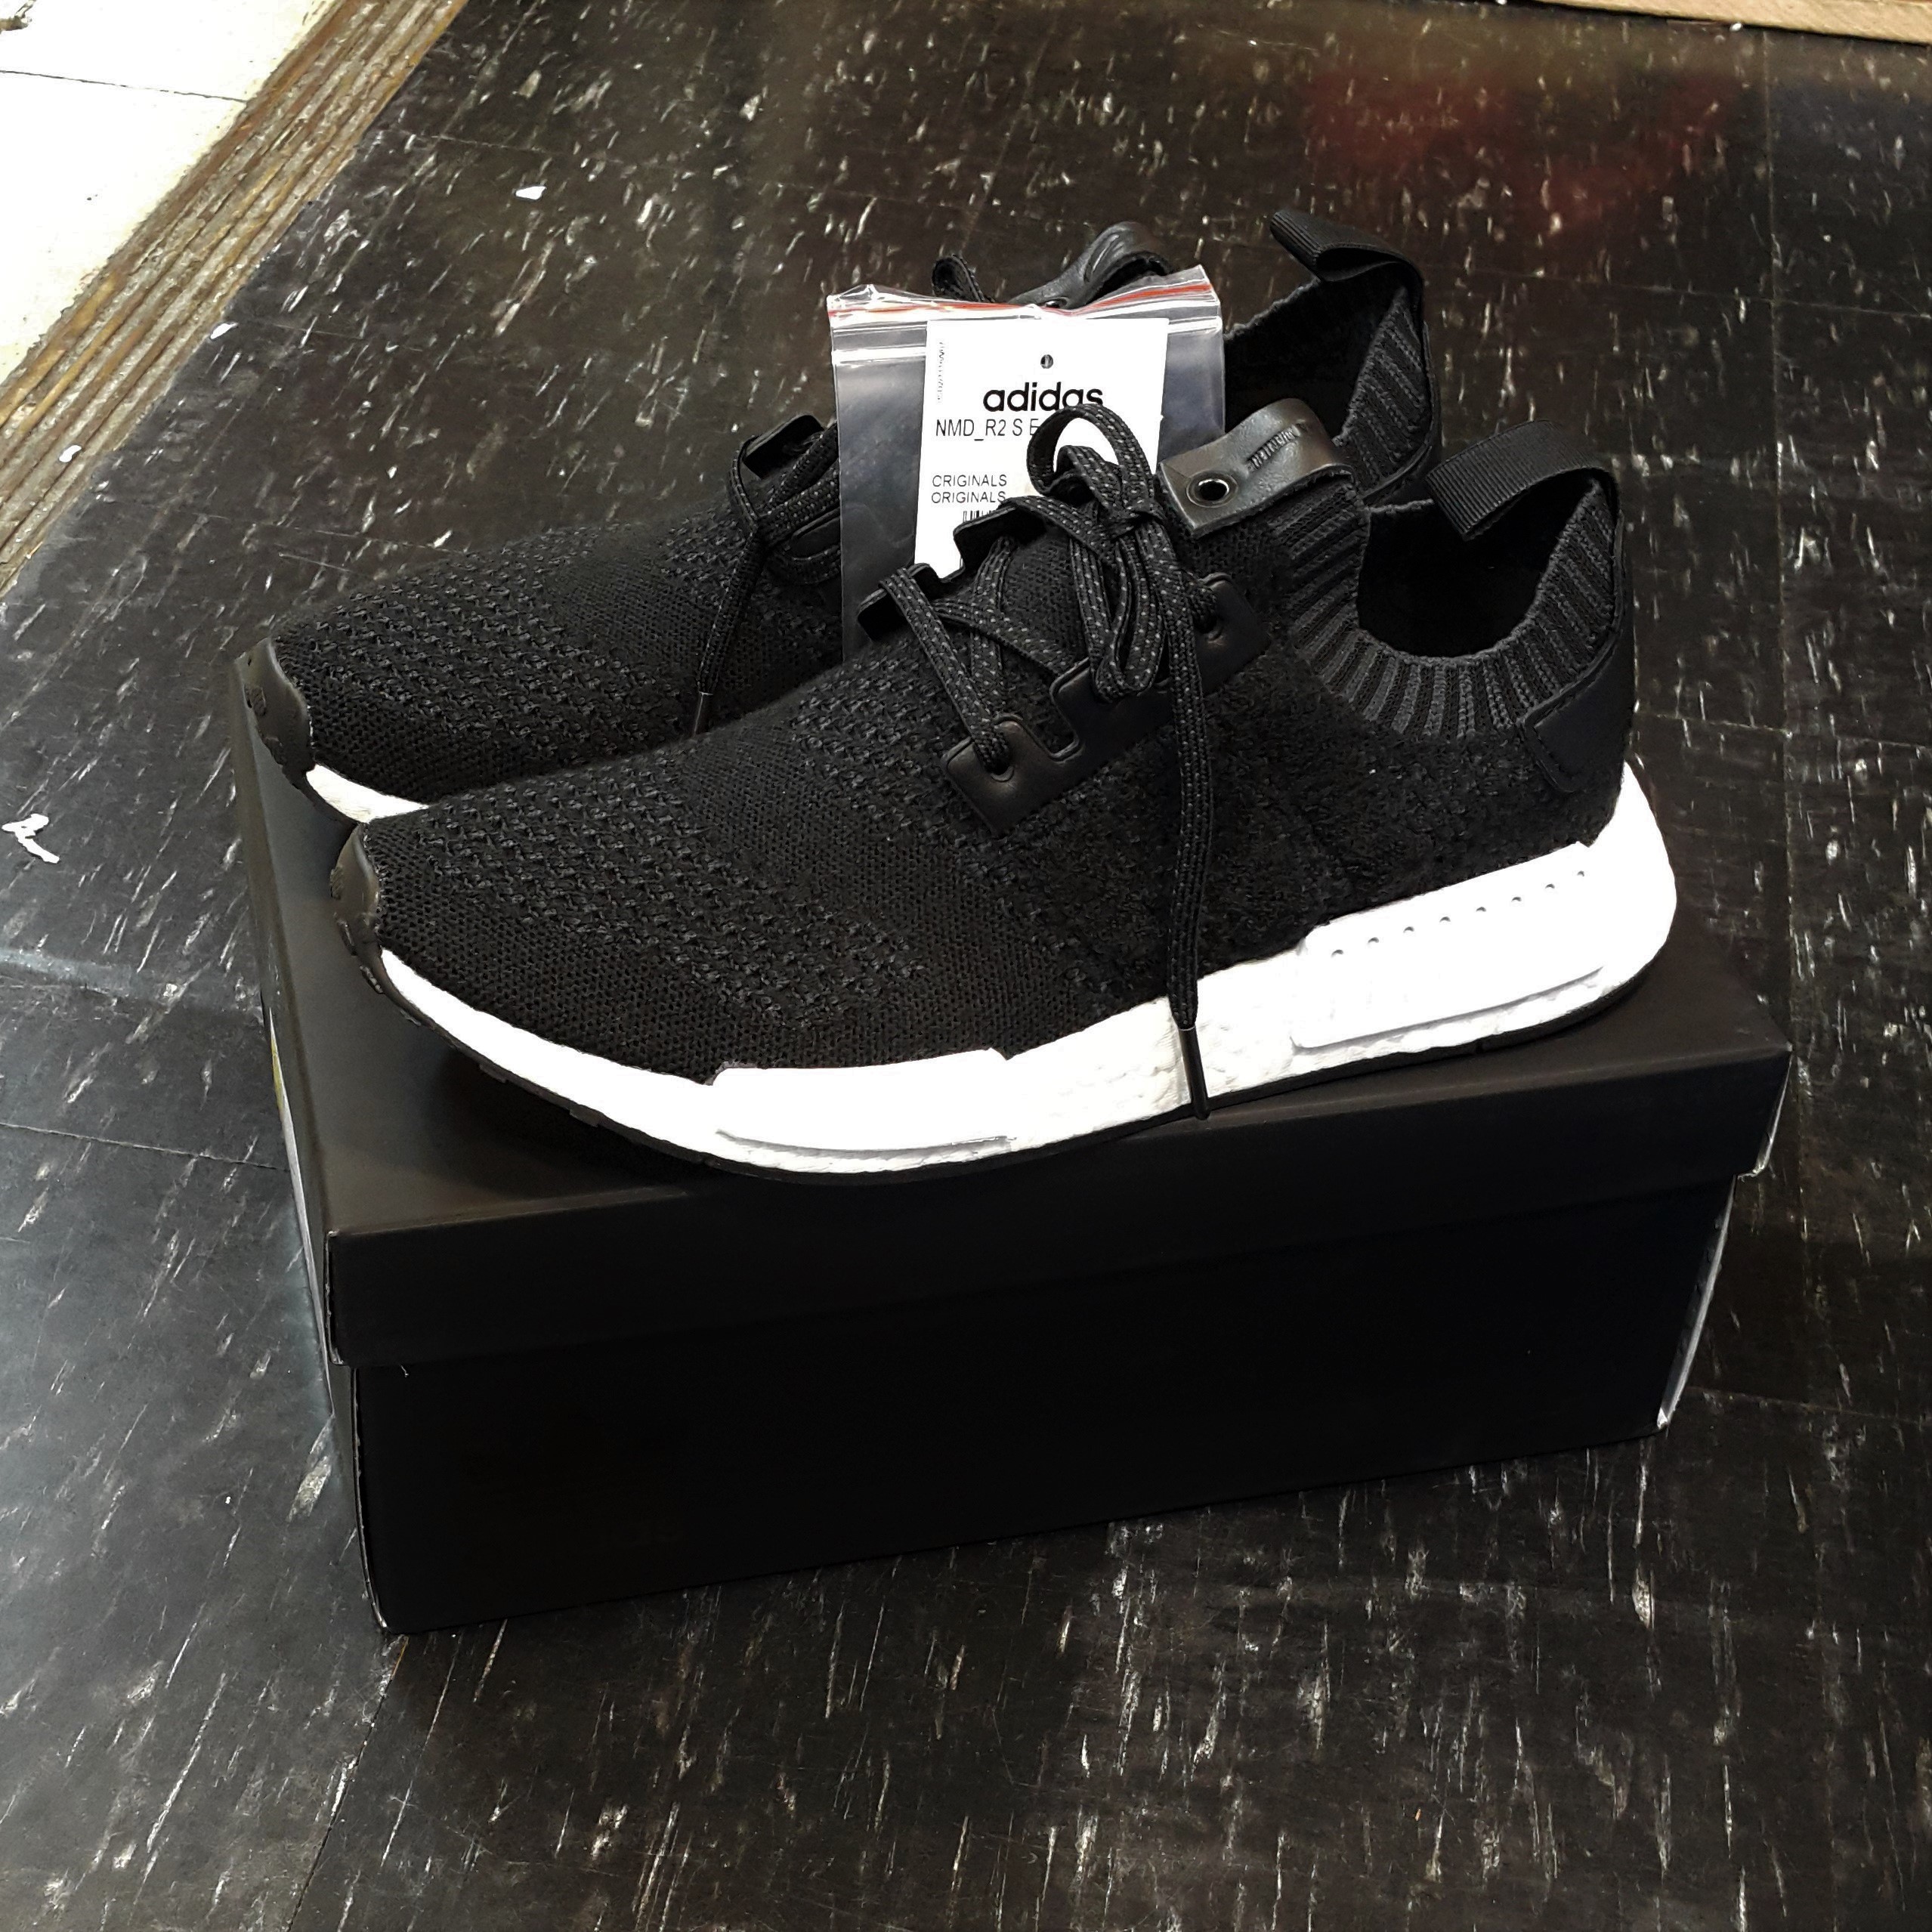 adidas Consortium SNEAKER EXCHANGE - INVINCIBLE x A Ma Maniere Ultraboost & NMD R1